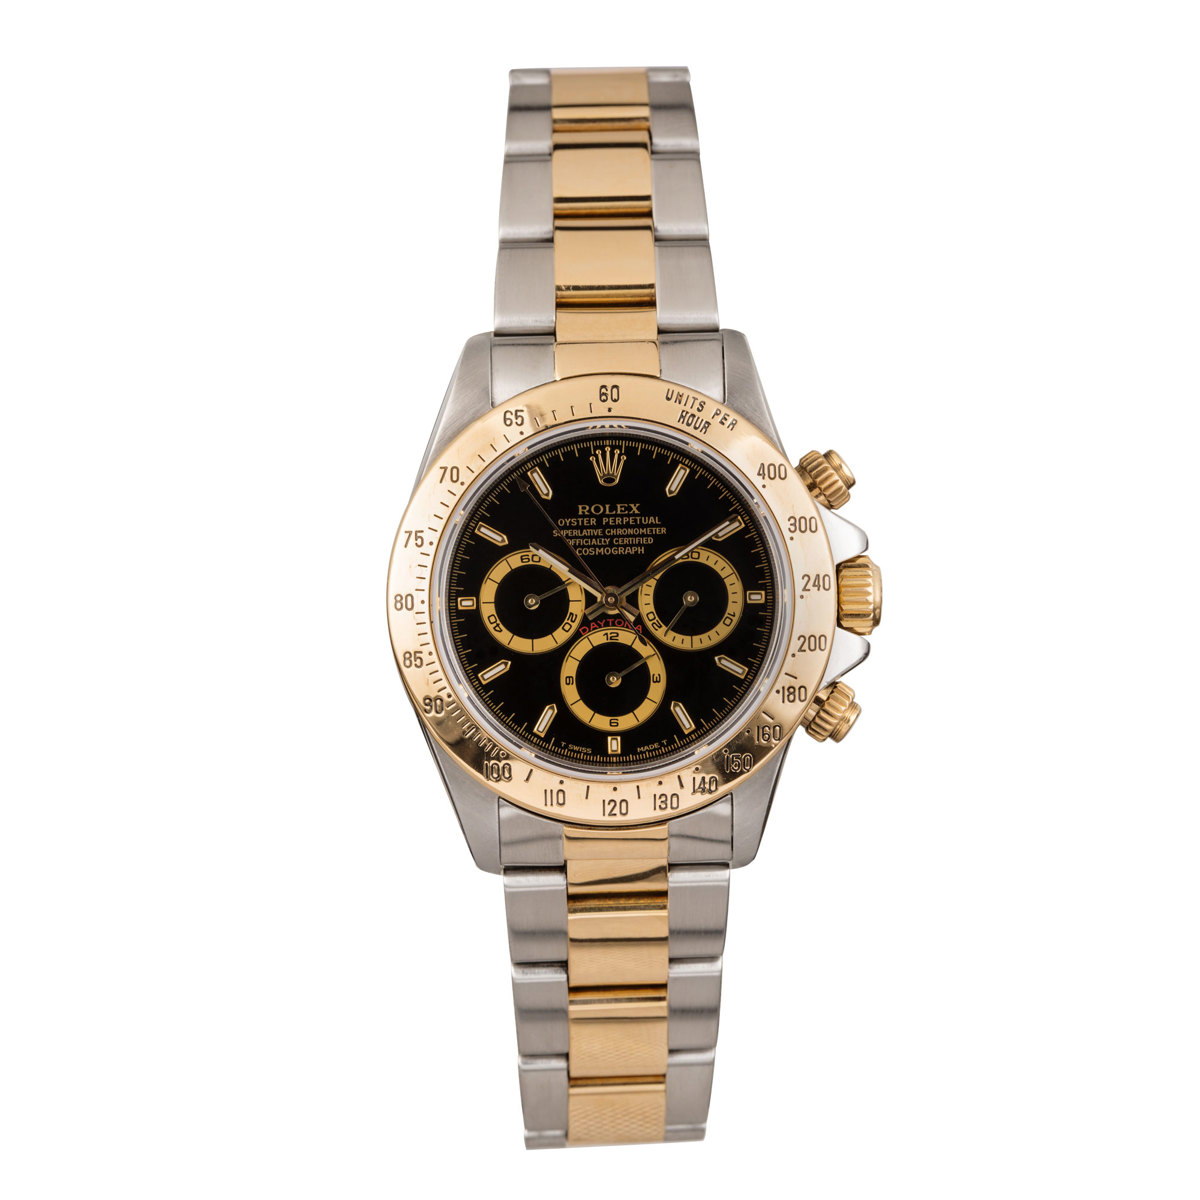 Rolex Daytona Ref 16523 A Stainless Steel Yellow Gold Chronograph Wristwatch with Bracelet Circa 1996 offered by Sotheby's